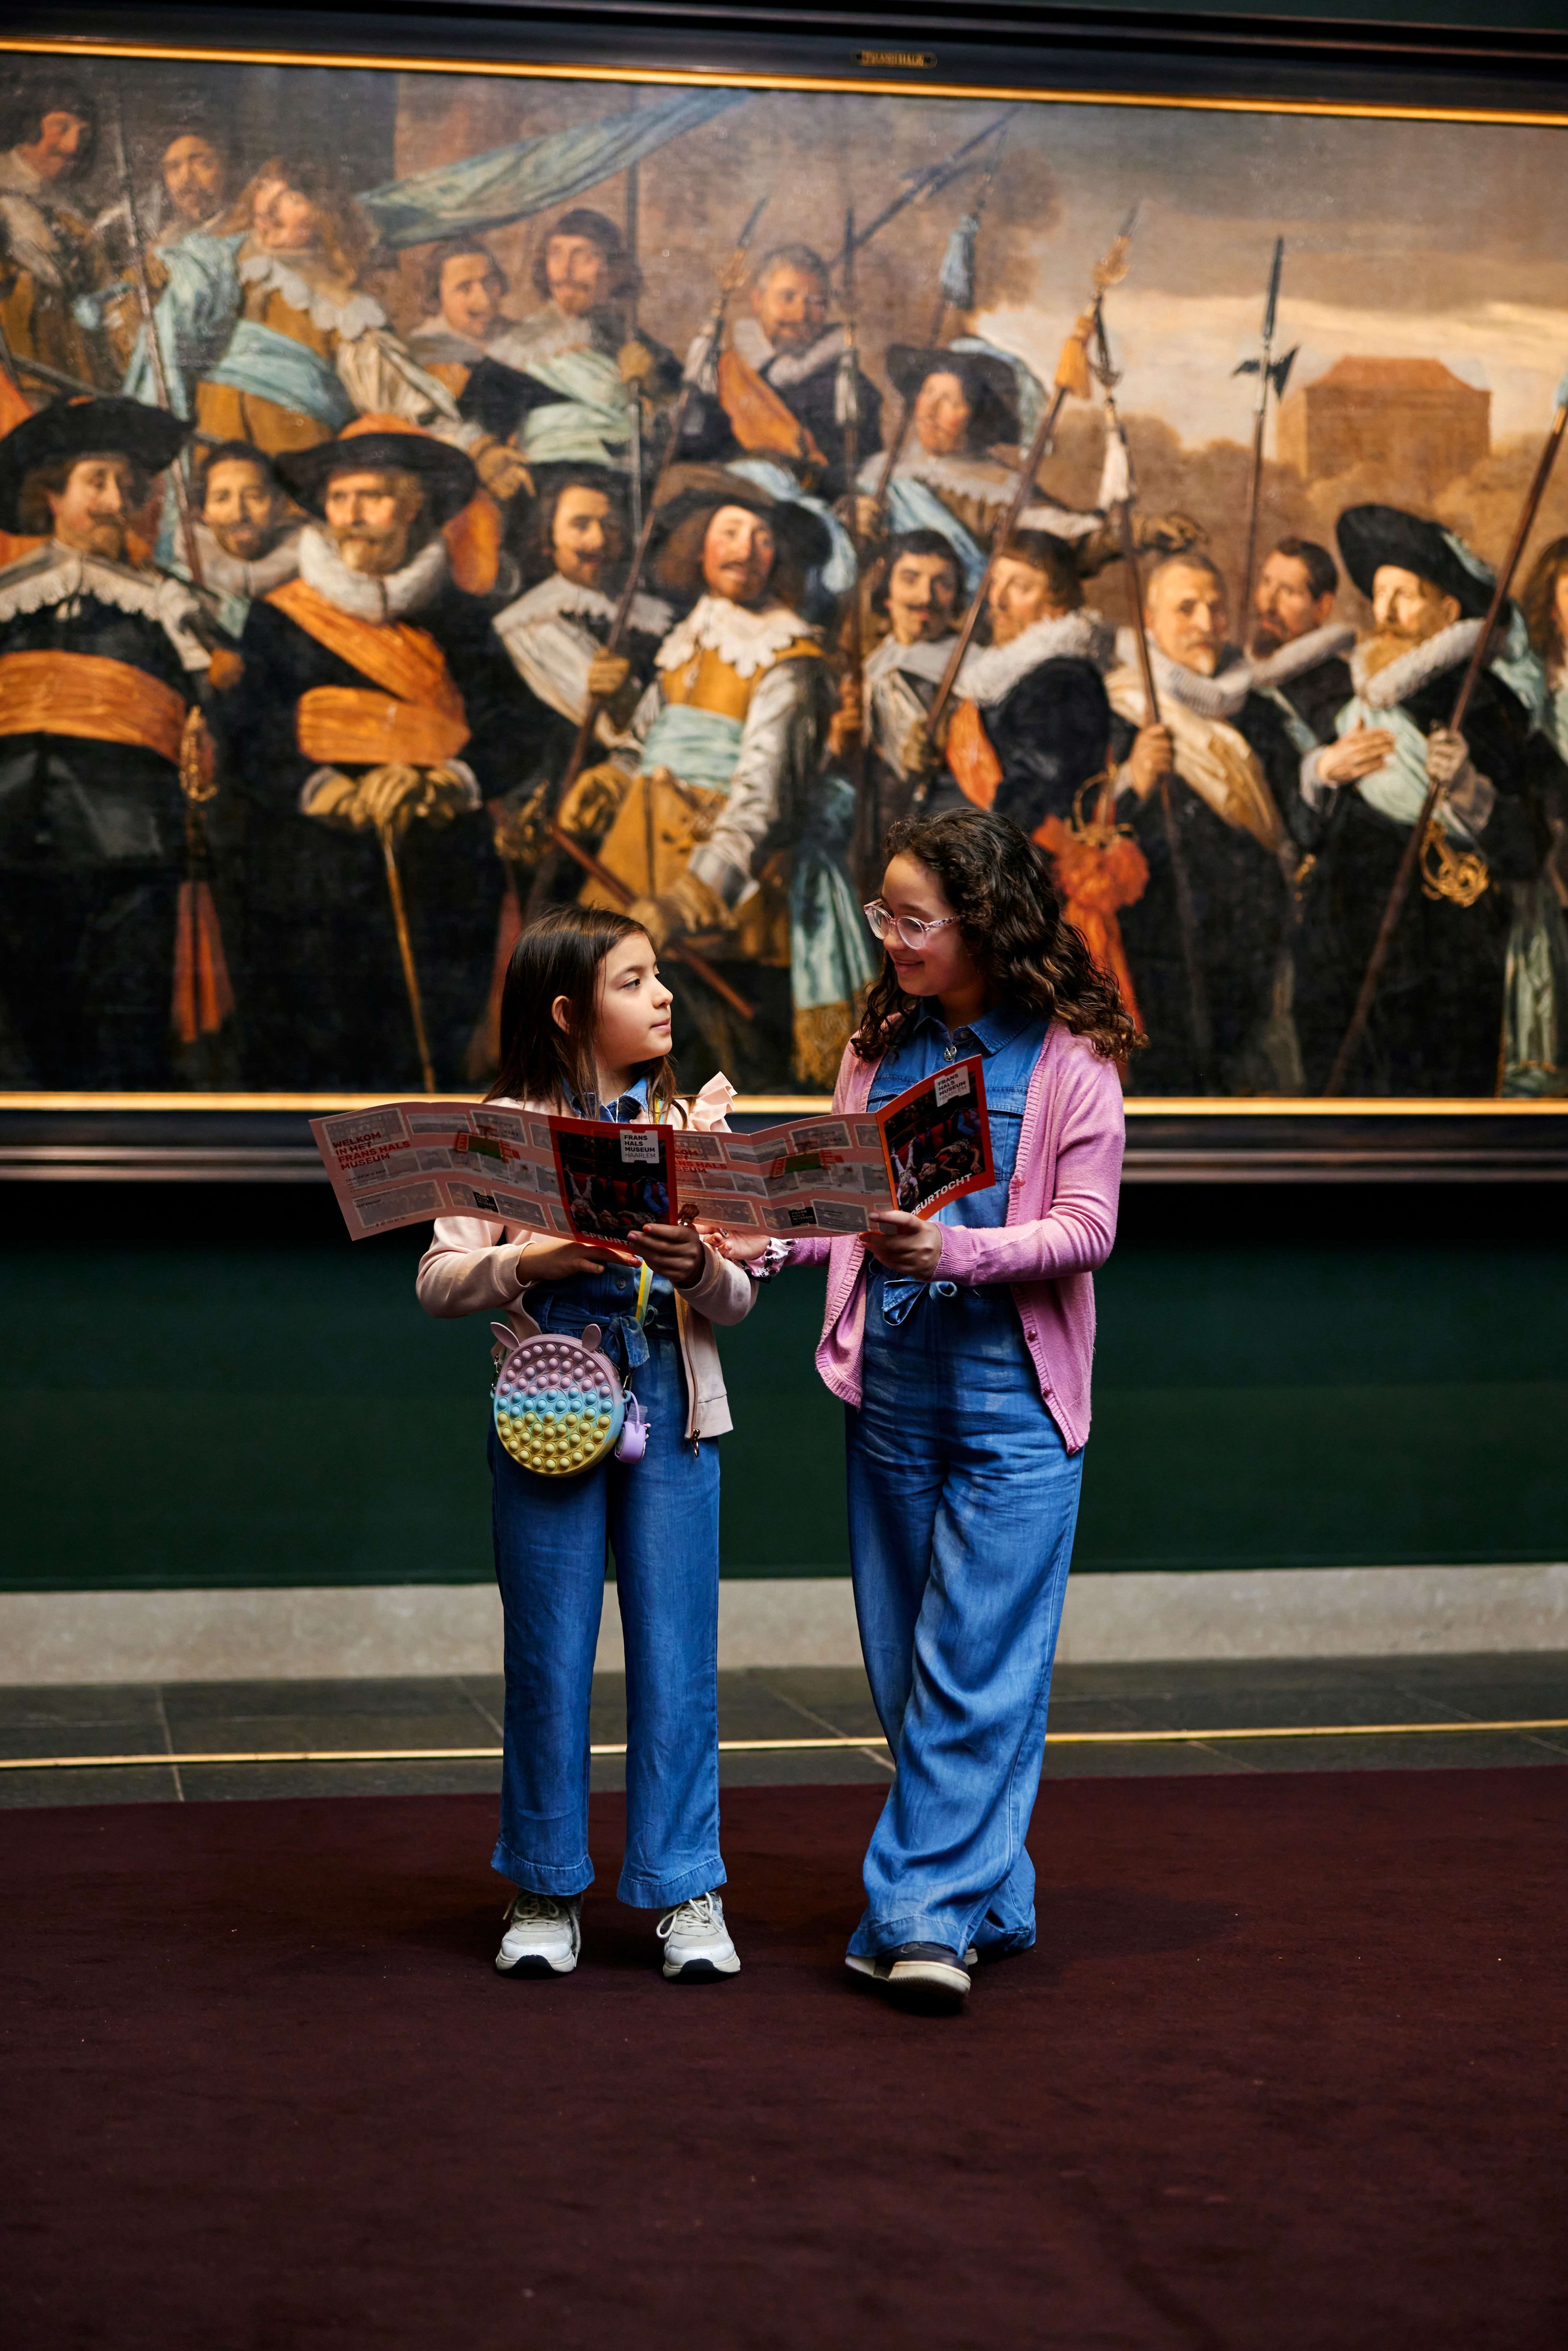 Two children taking part in the scavenger hunt at the Frans Hals Museum.